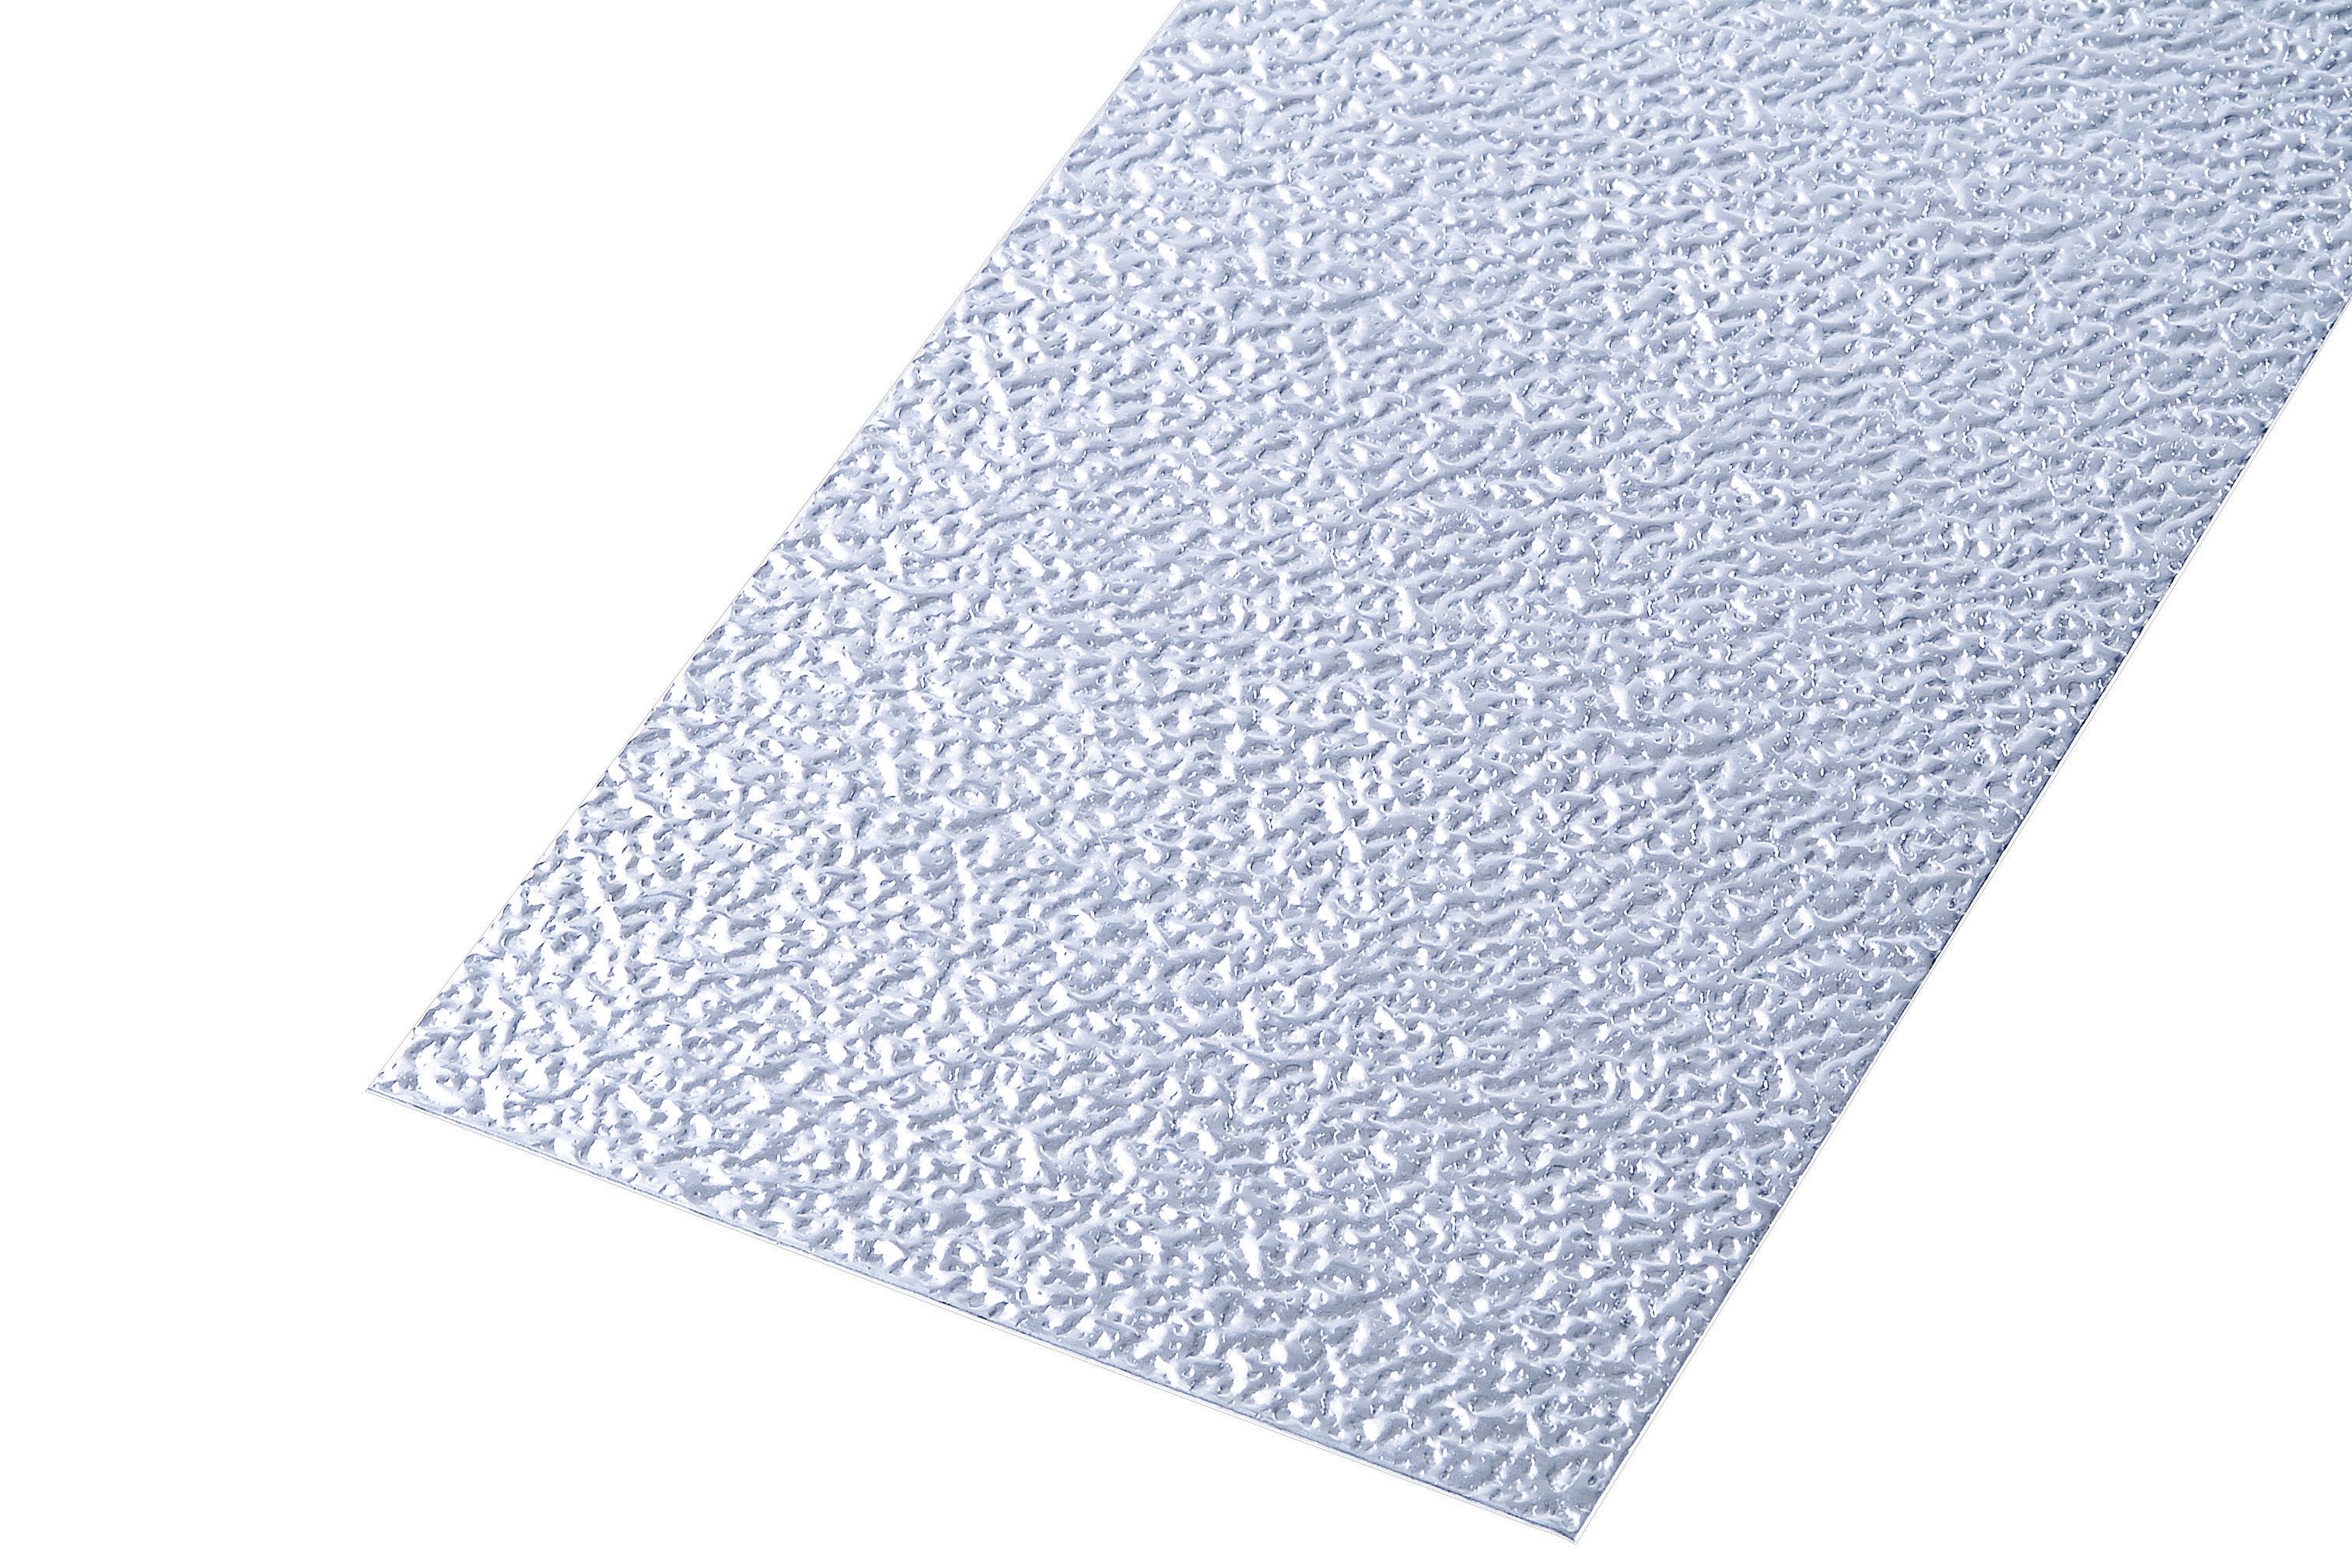 Image of Wickes Metal Uncoated Aluminium Roughcast Effect Sheet - 120mm x 1m